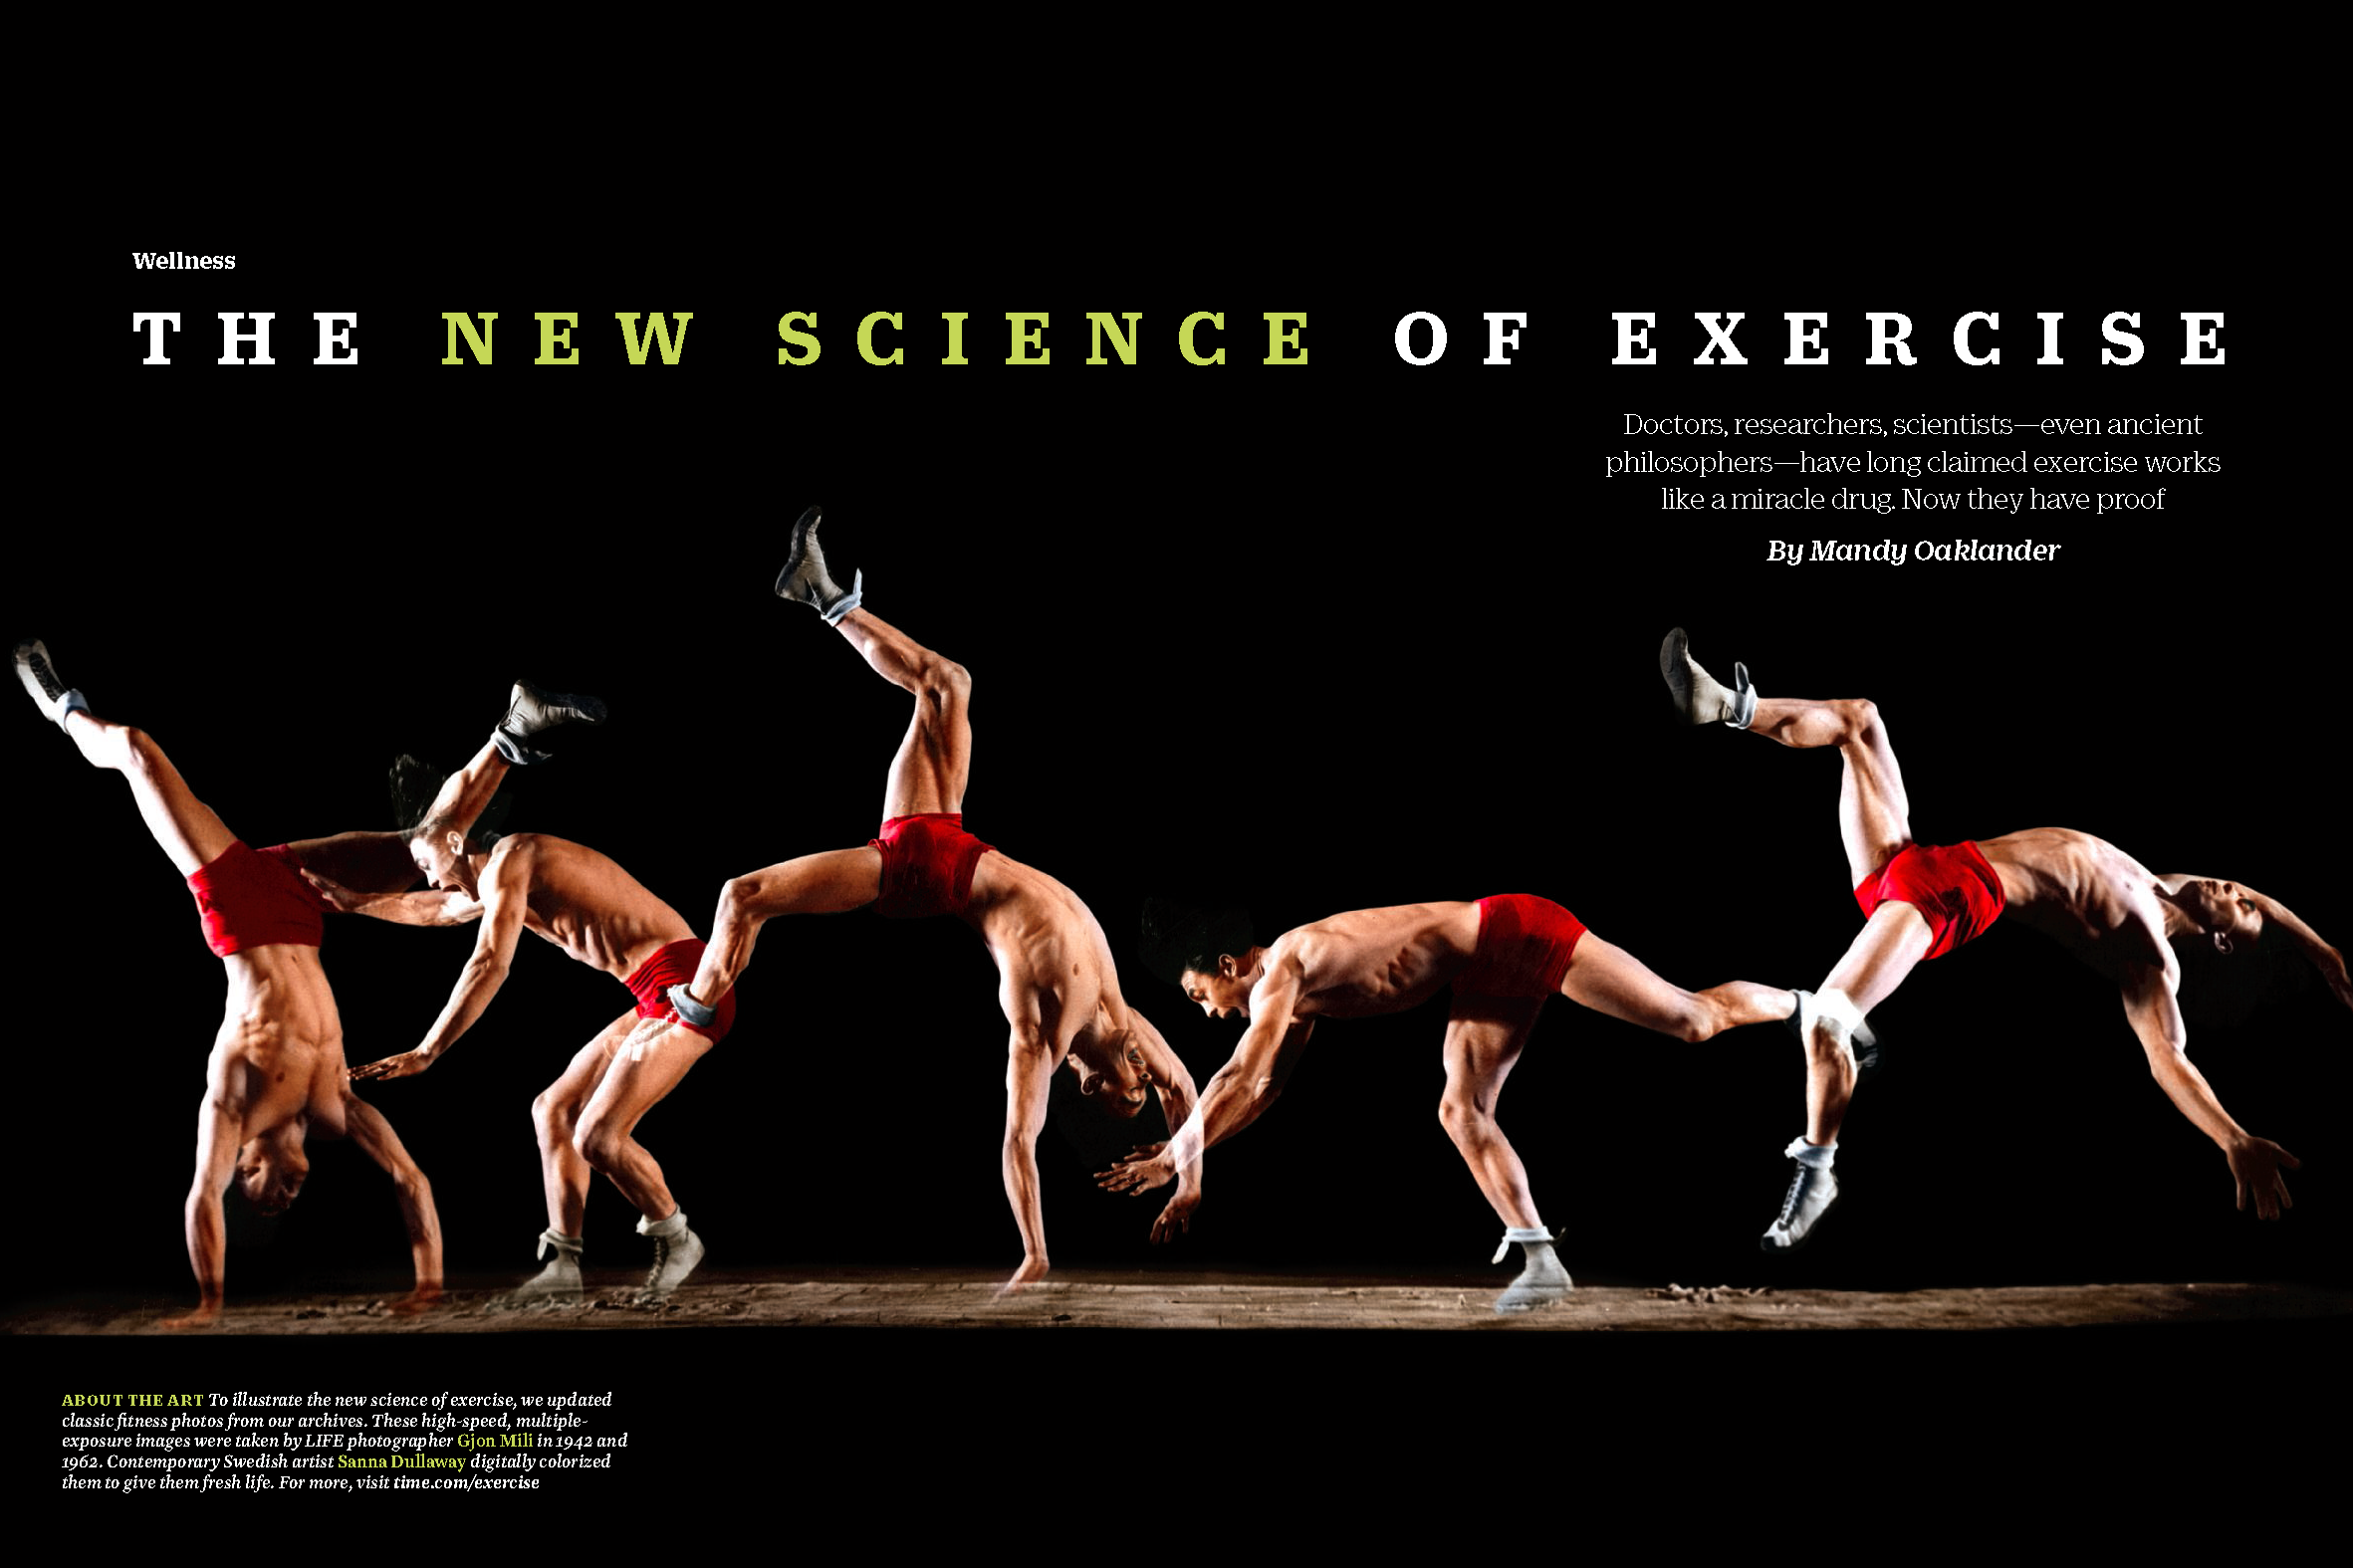 The science of exercise